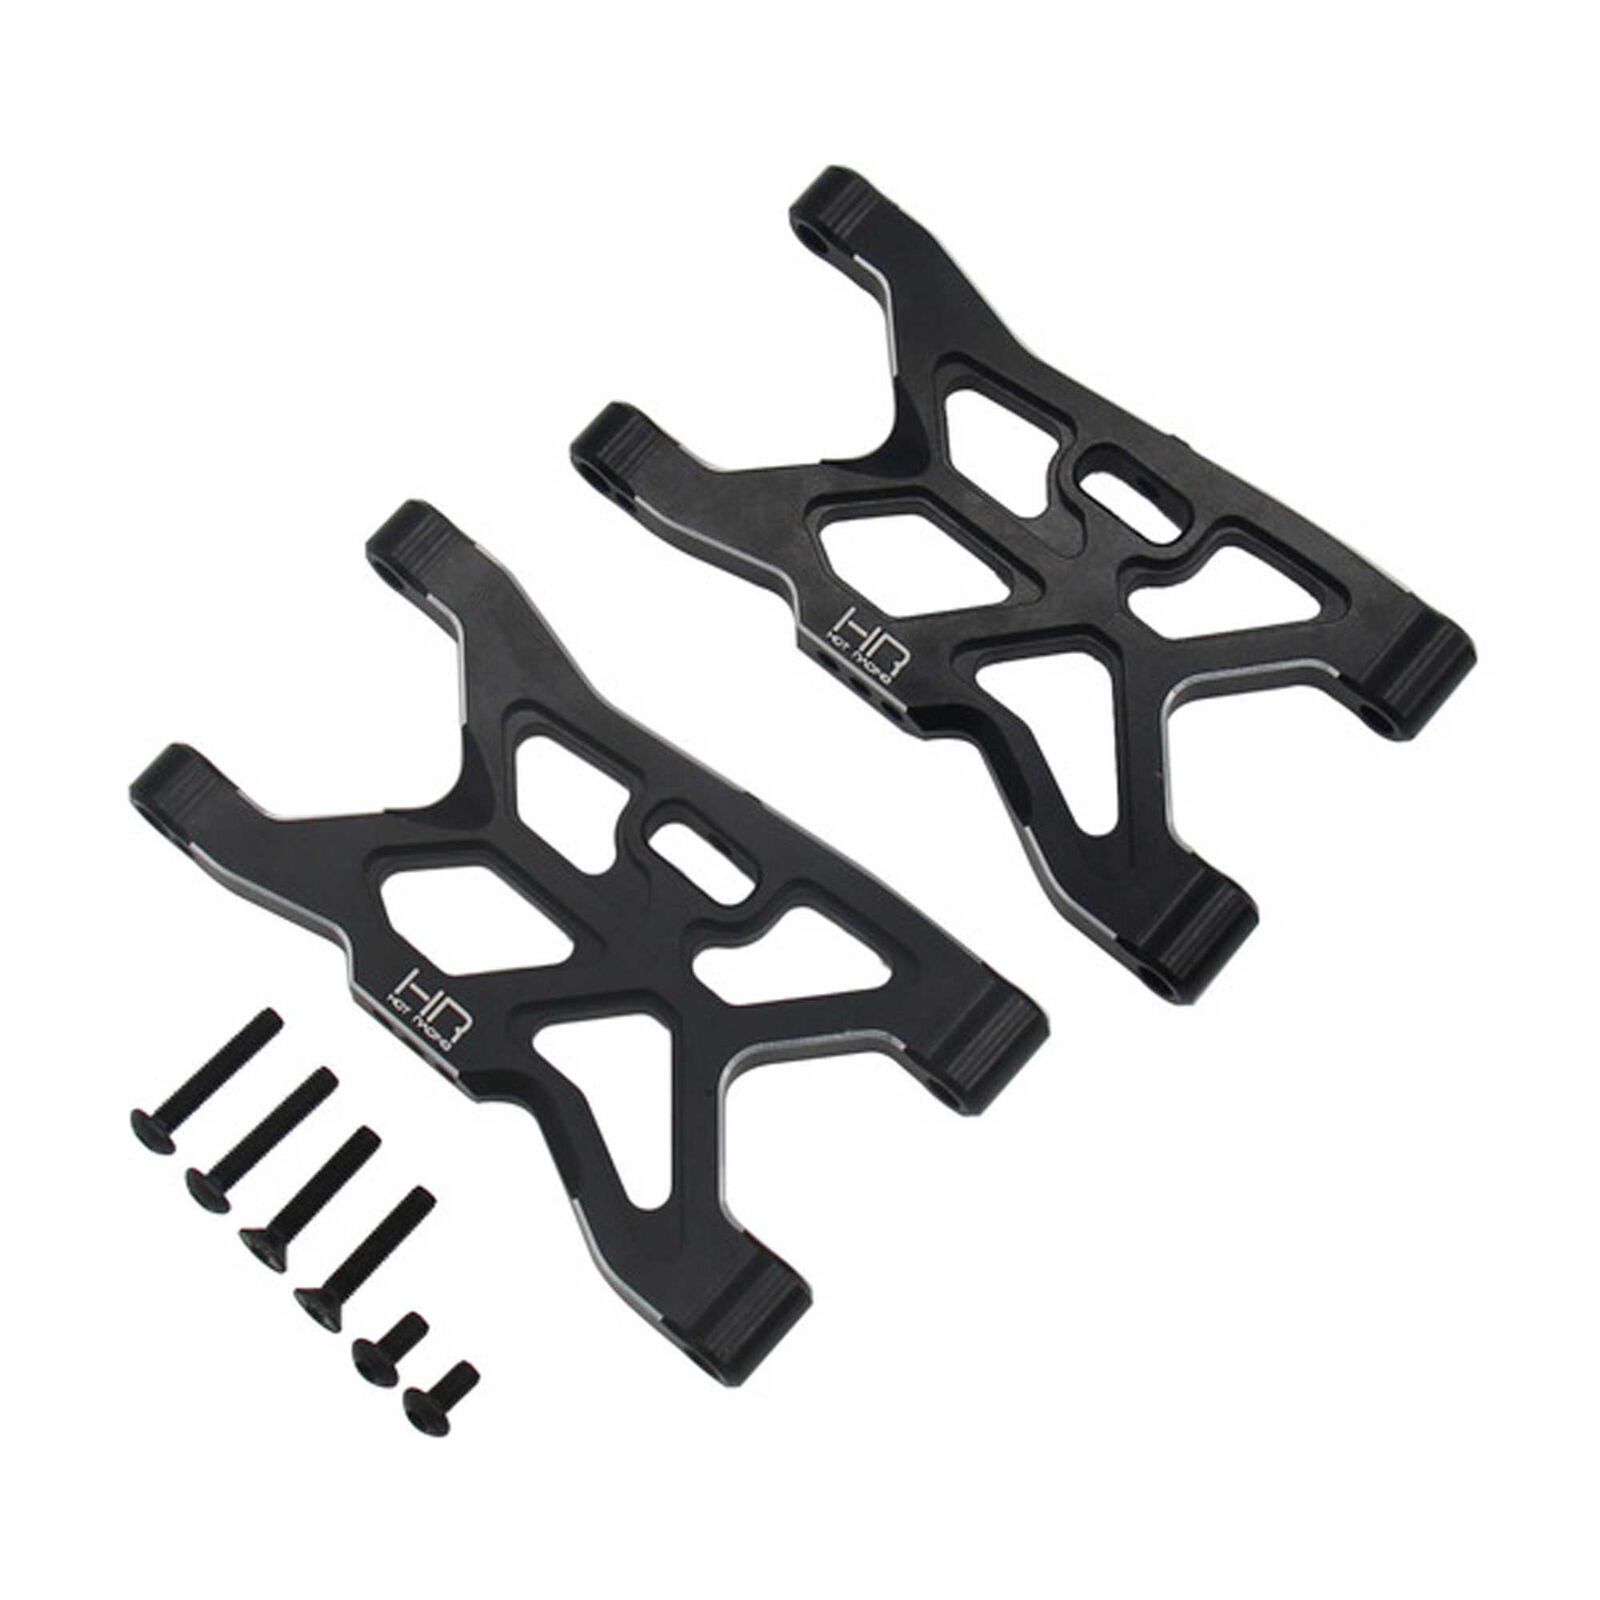 Lower Rear Suspension Arms, Arrma 1/8 All Road